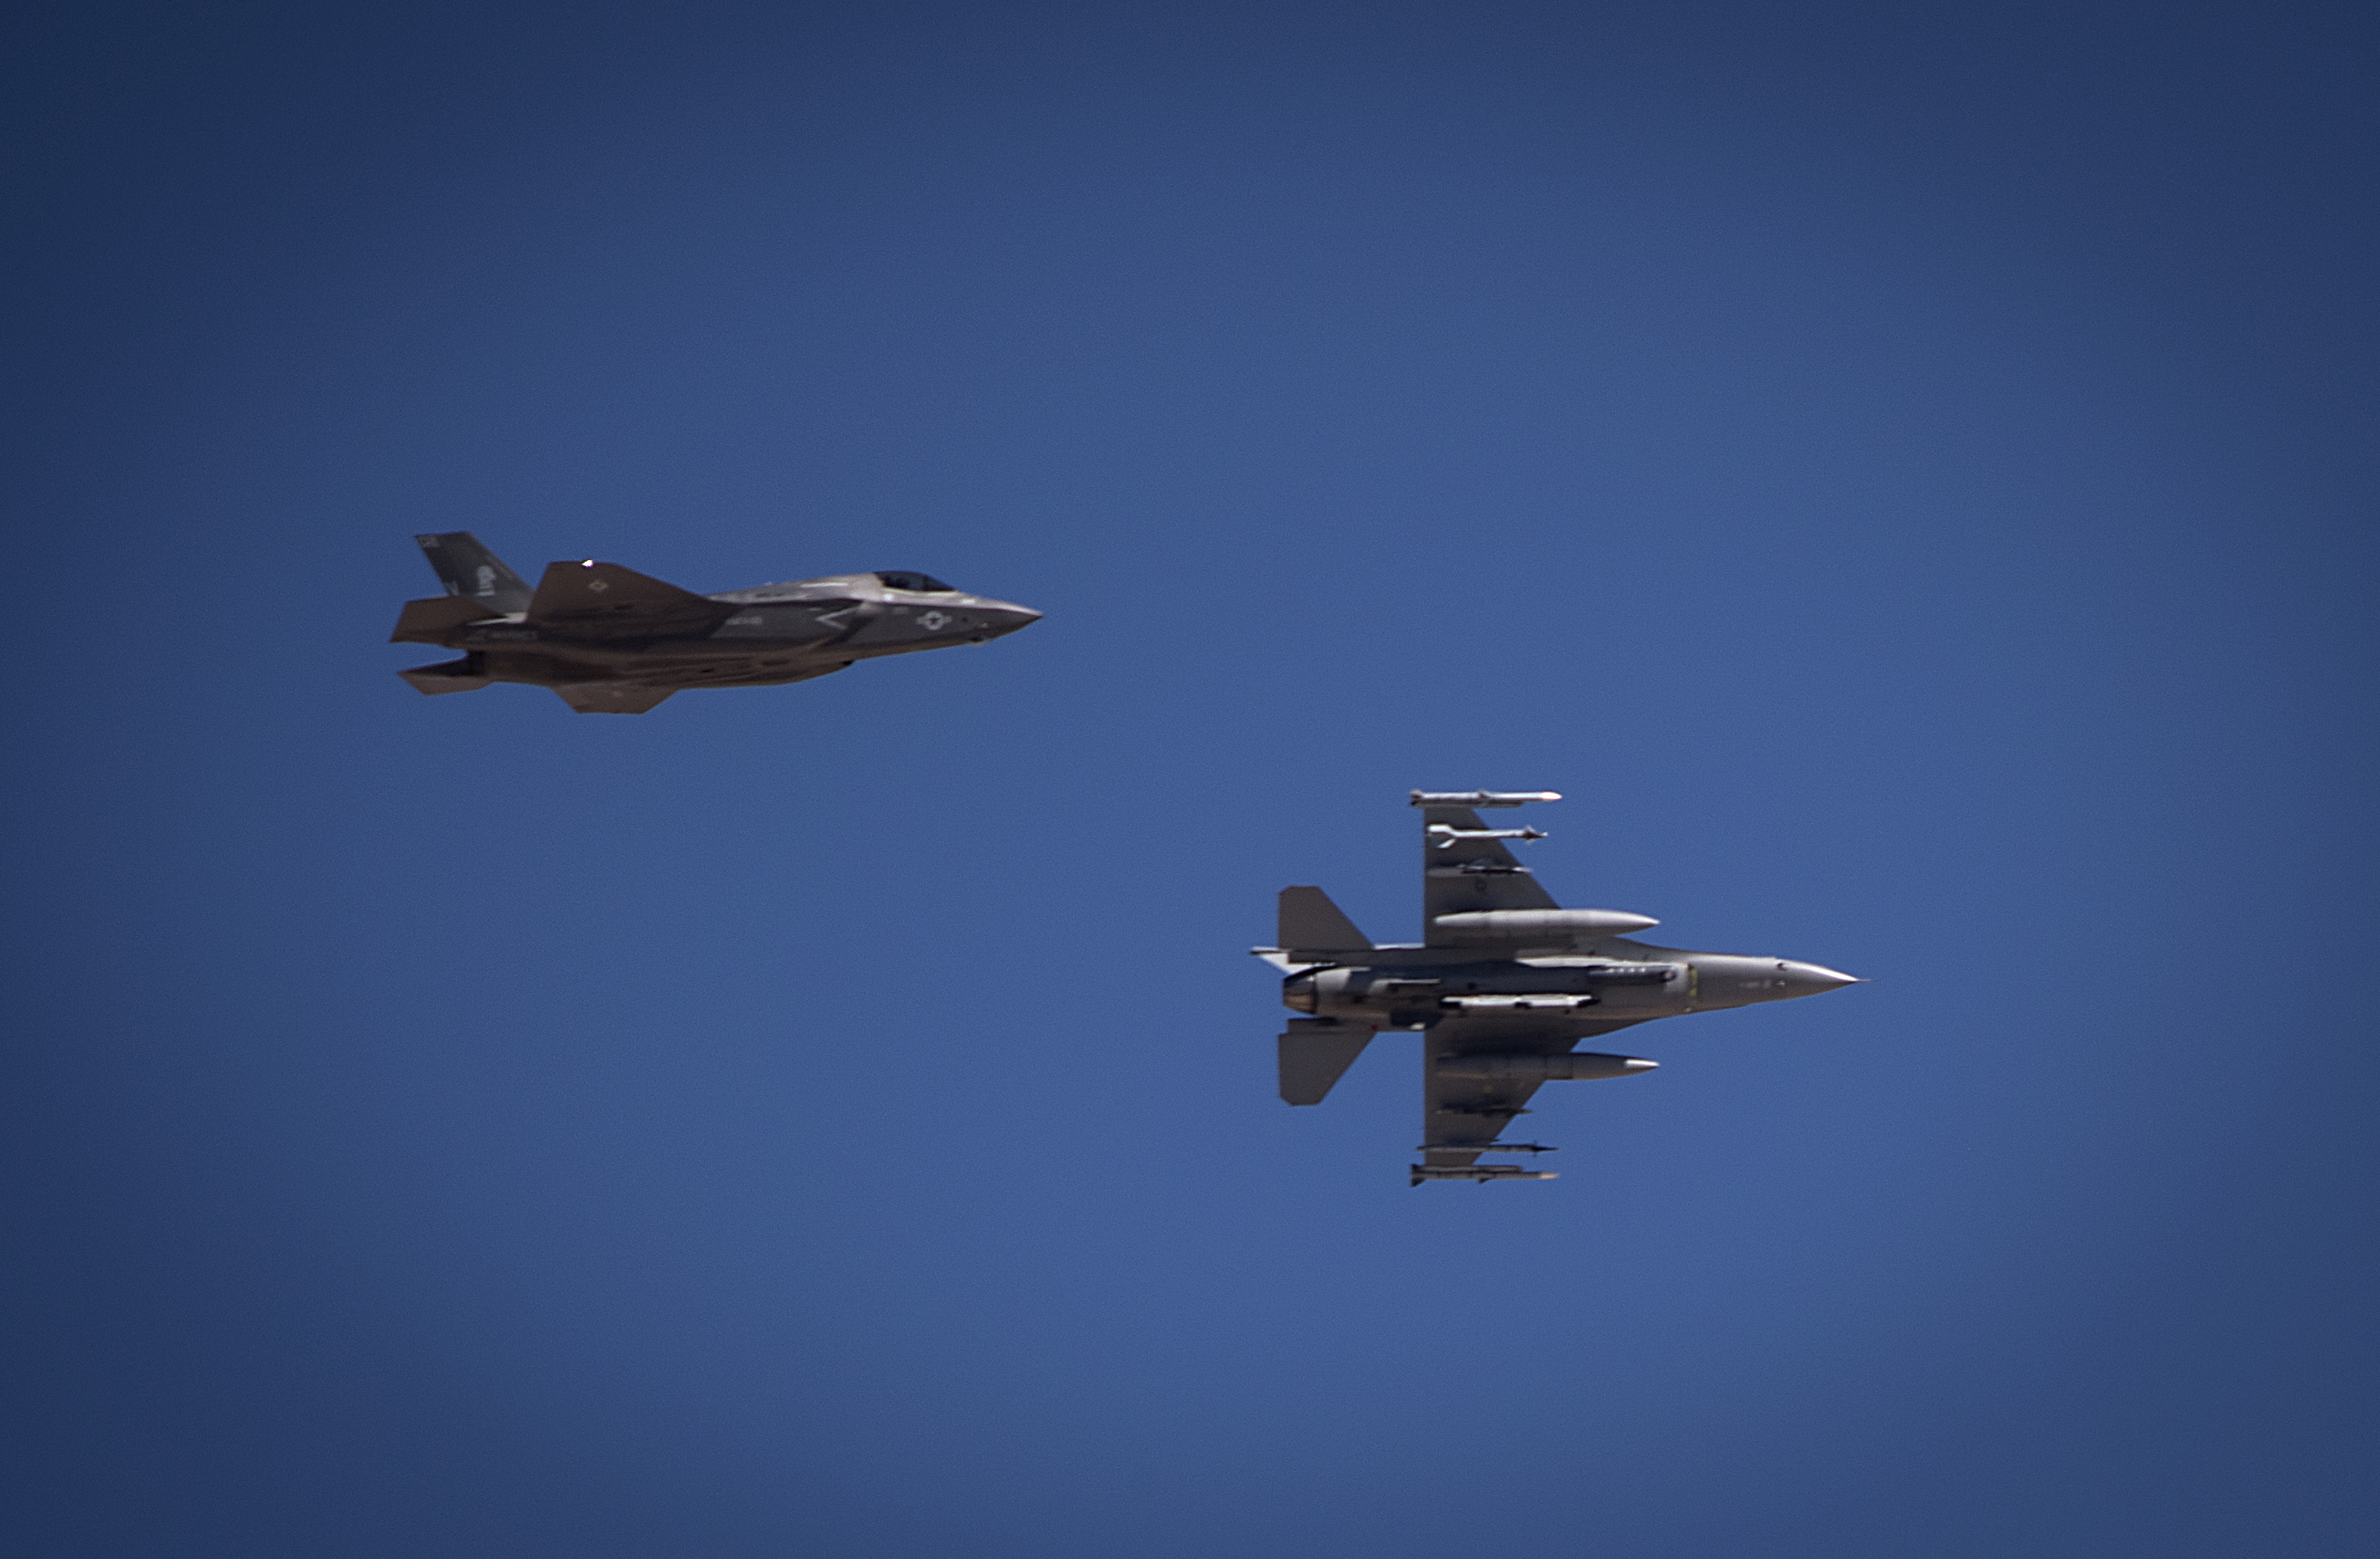 A F-35B, assigned to the Marine Fighter Attack Squadron 121 out of Marine Corps Air Station Yuma, Arizona, flies level as a F-16 Fighting Falcon from the 177th Fighter Squadron from the New Jersey Air National Guard, banks hard during approach July 15, 2016 at Nellis Air Force Base, Nevada. US Air Force Photo